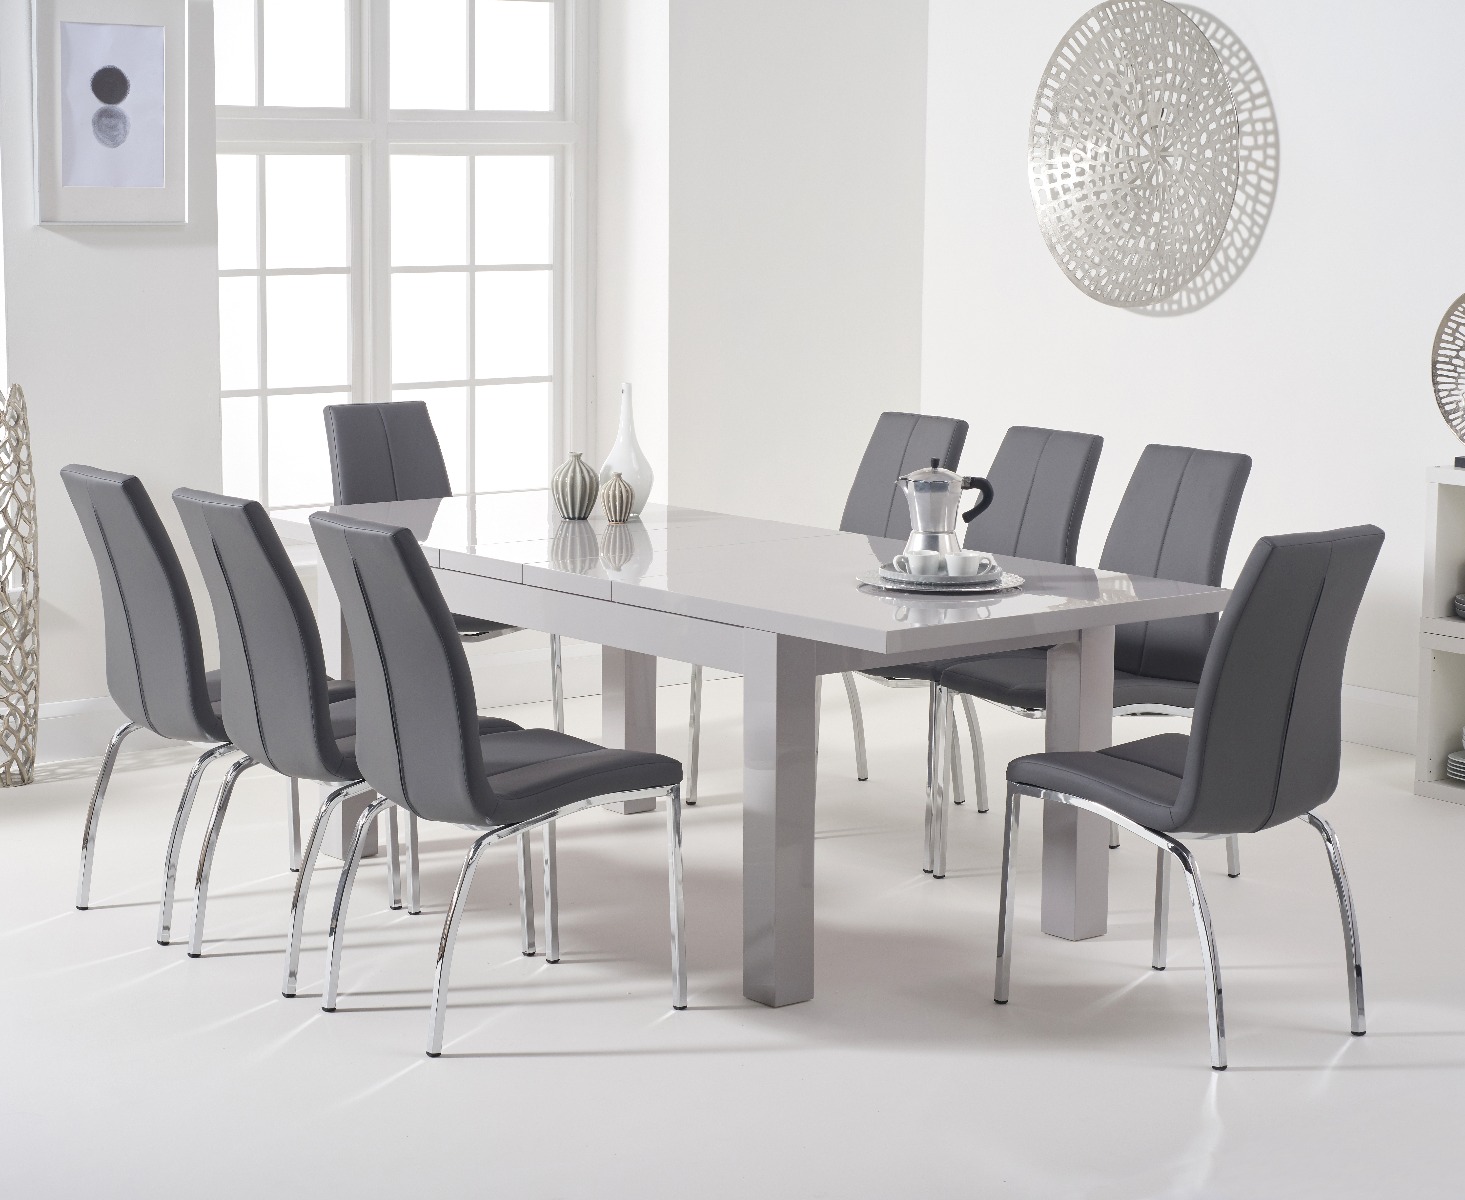 Atlanta Light Grey Gloss 160220cm Extending Dining Table With 8 Ivory White Cavello Chairs